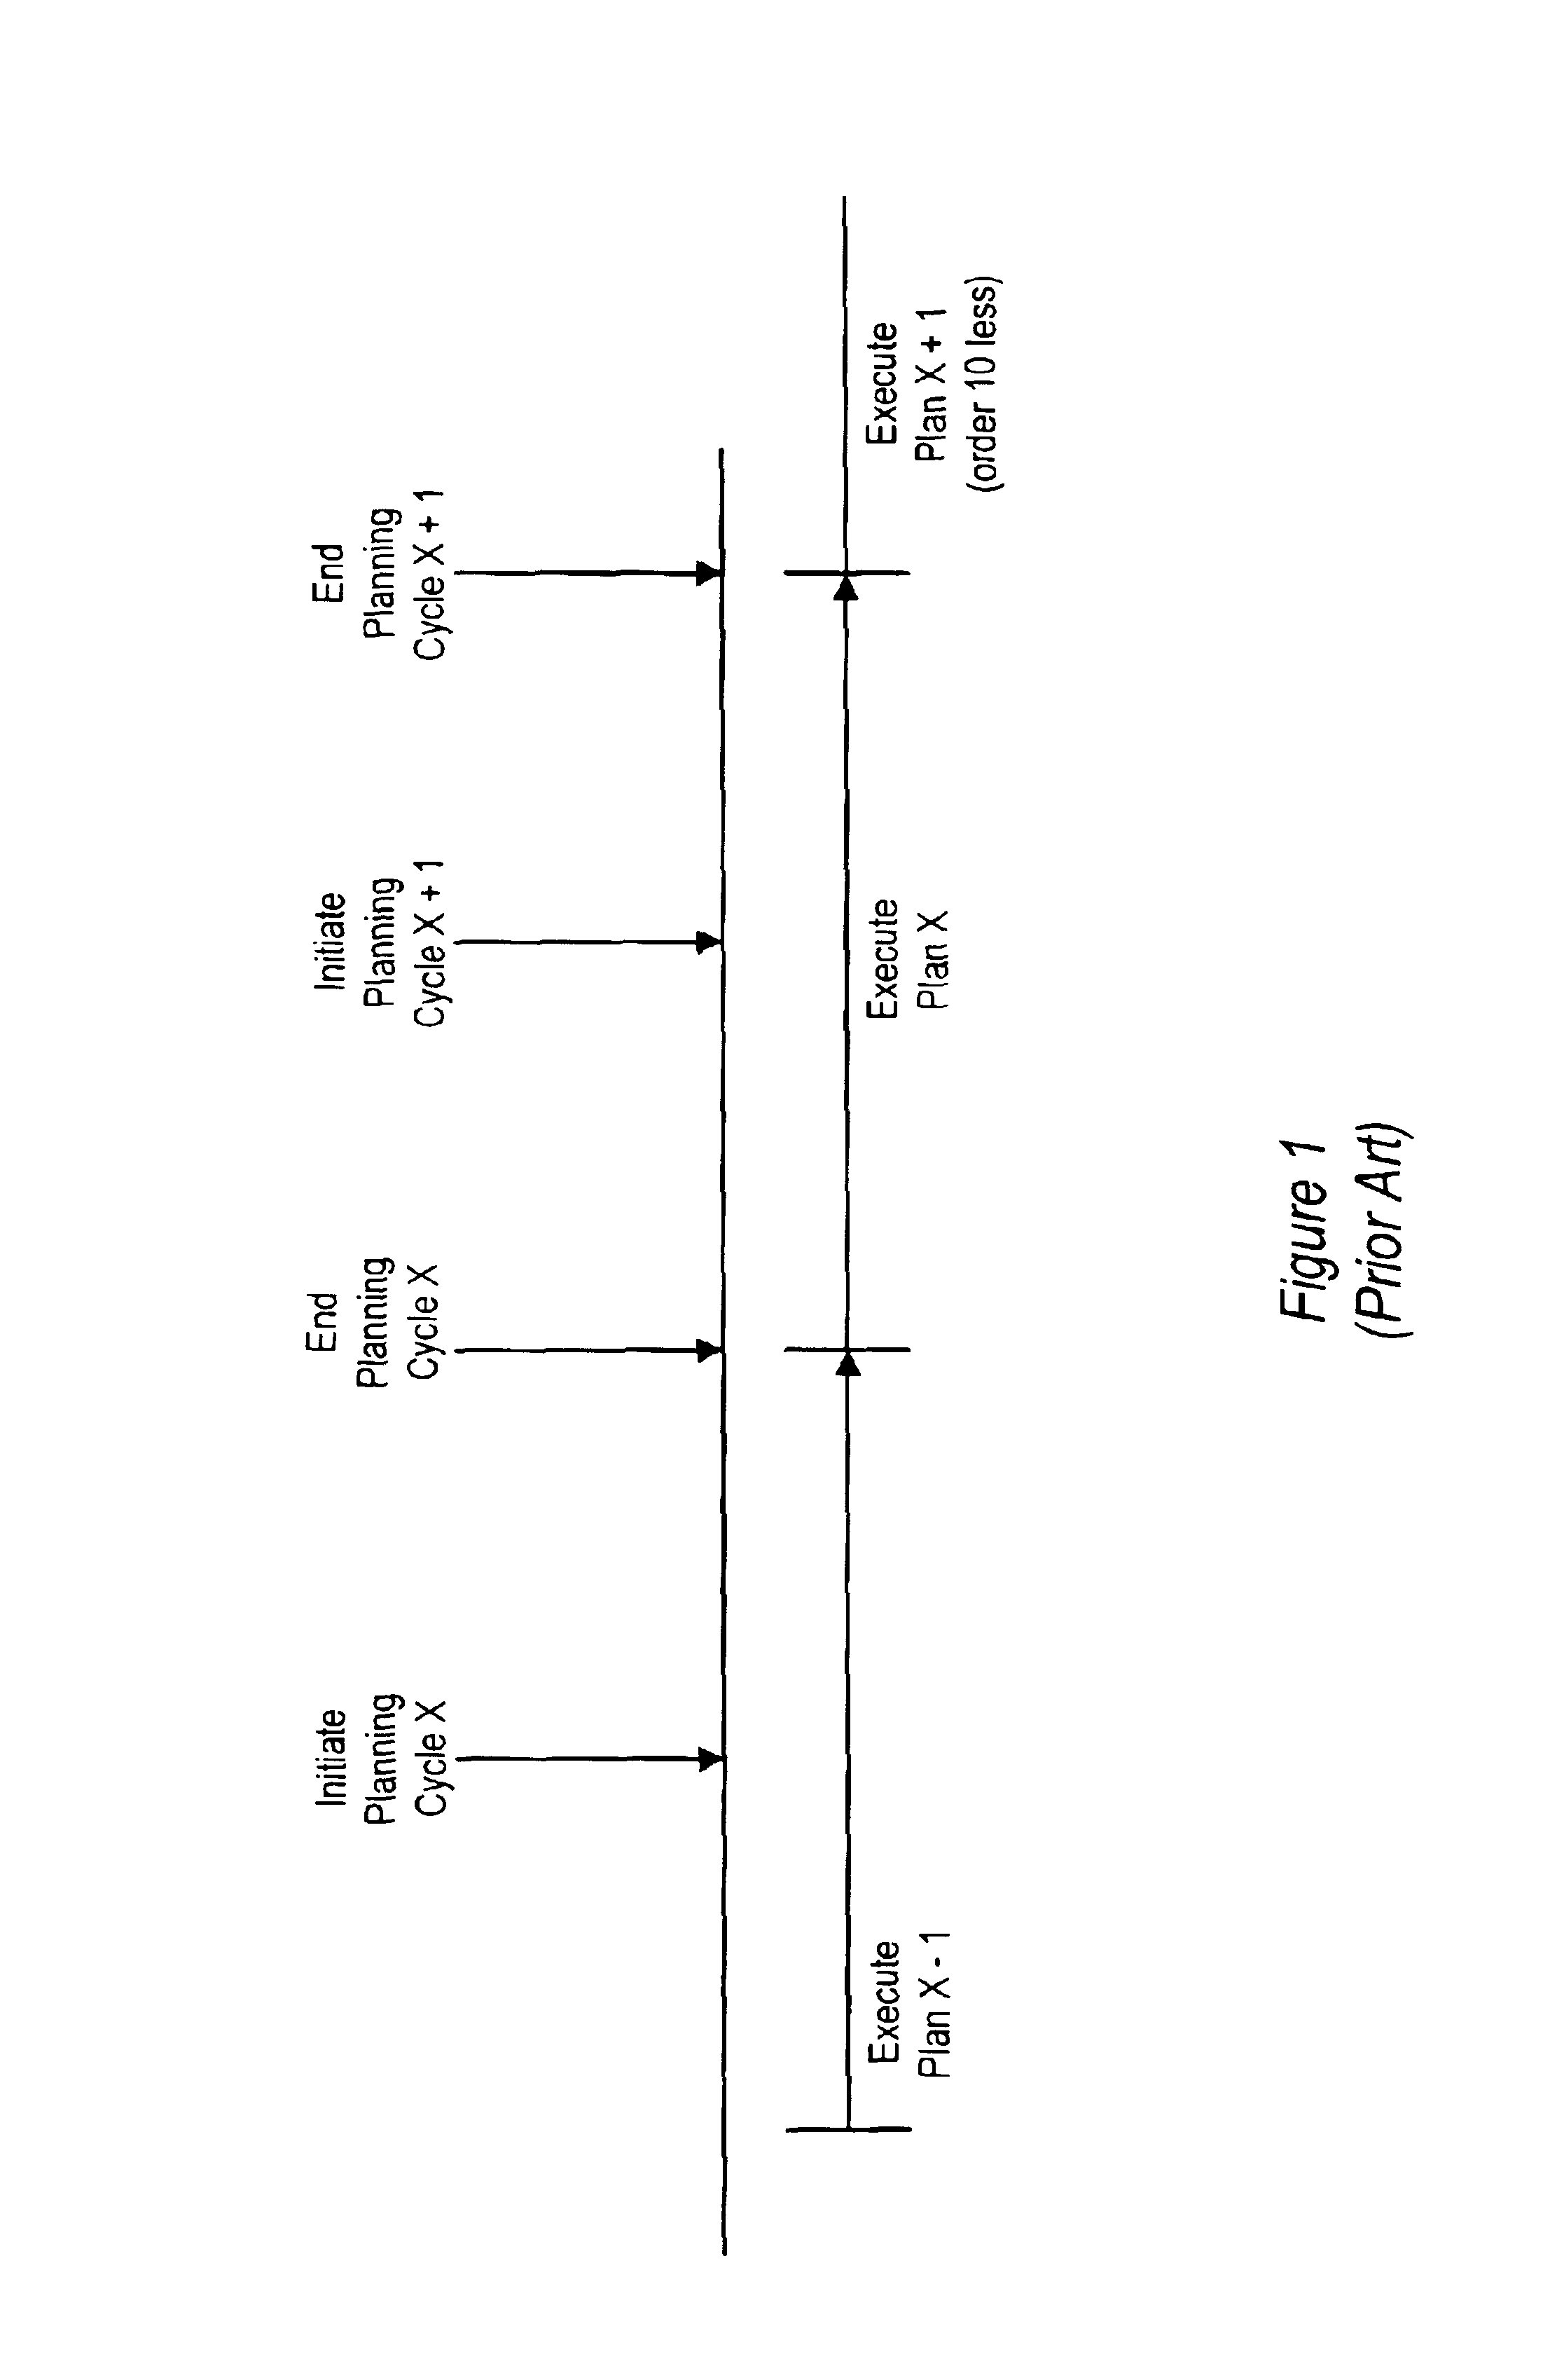 System for determining carrier service using logistics considerations